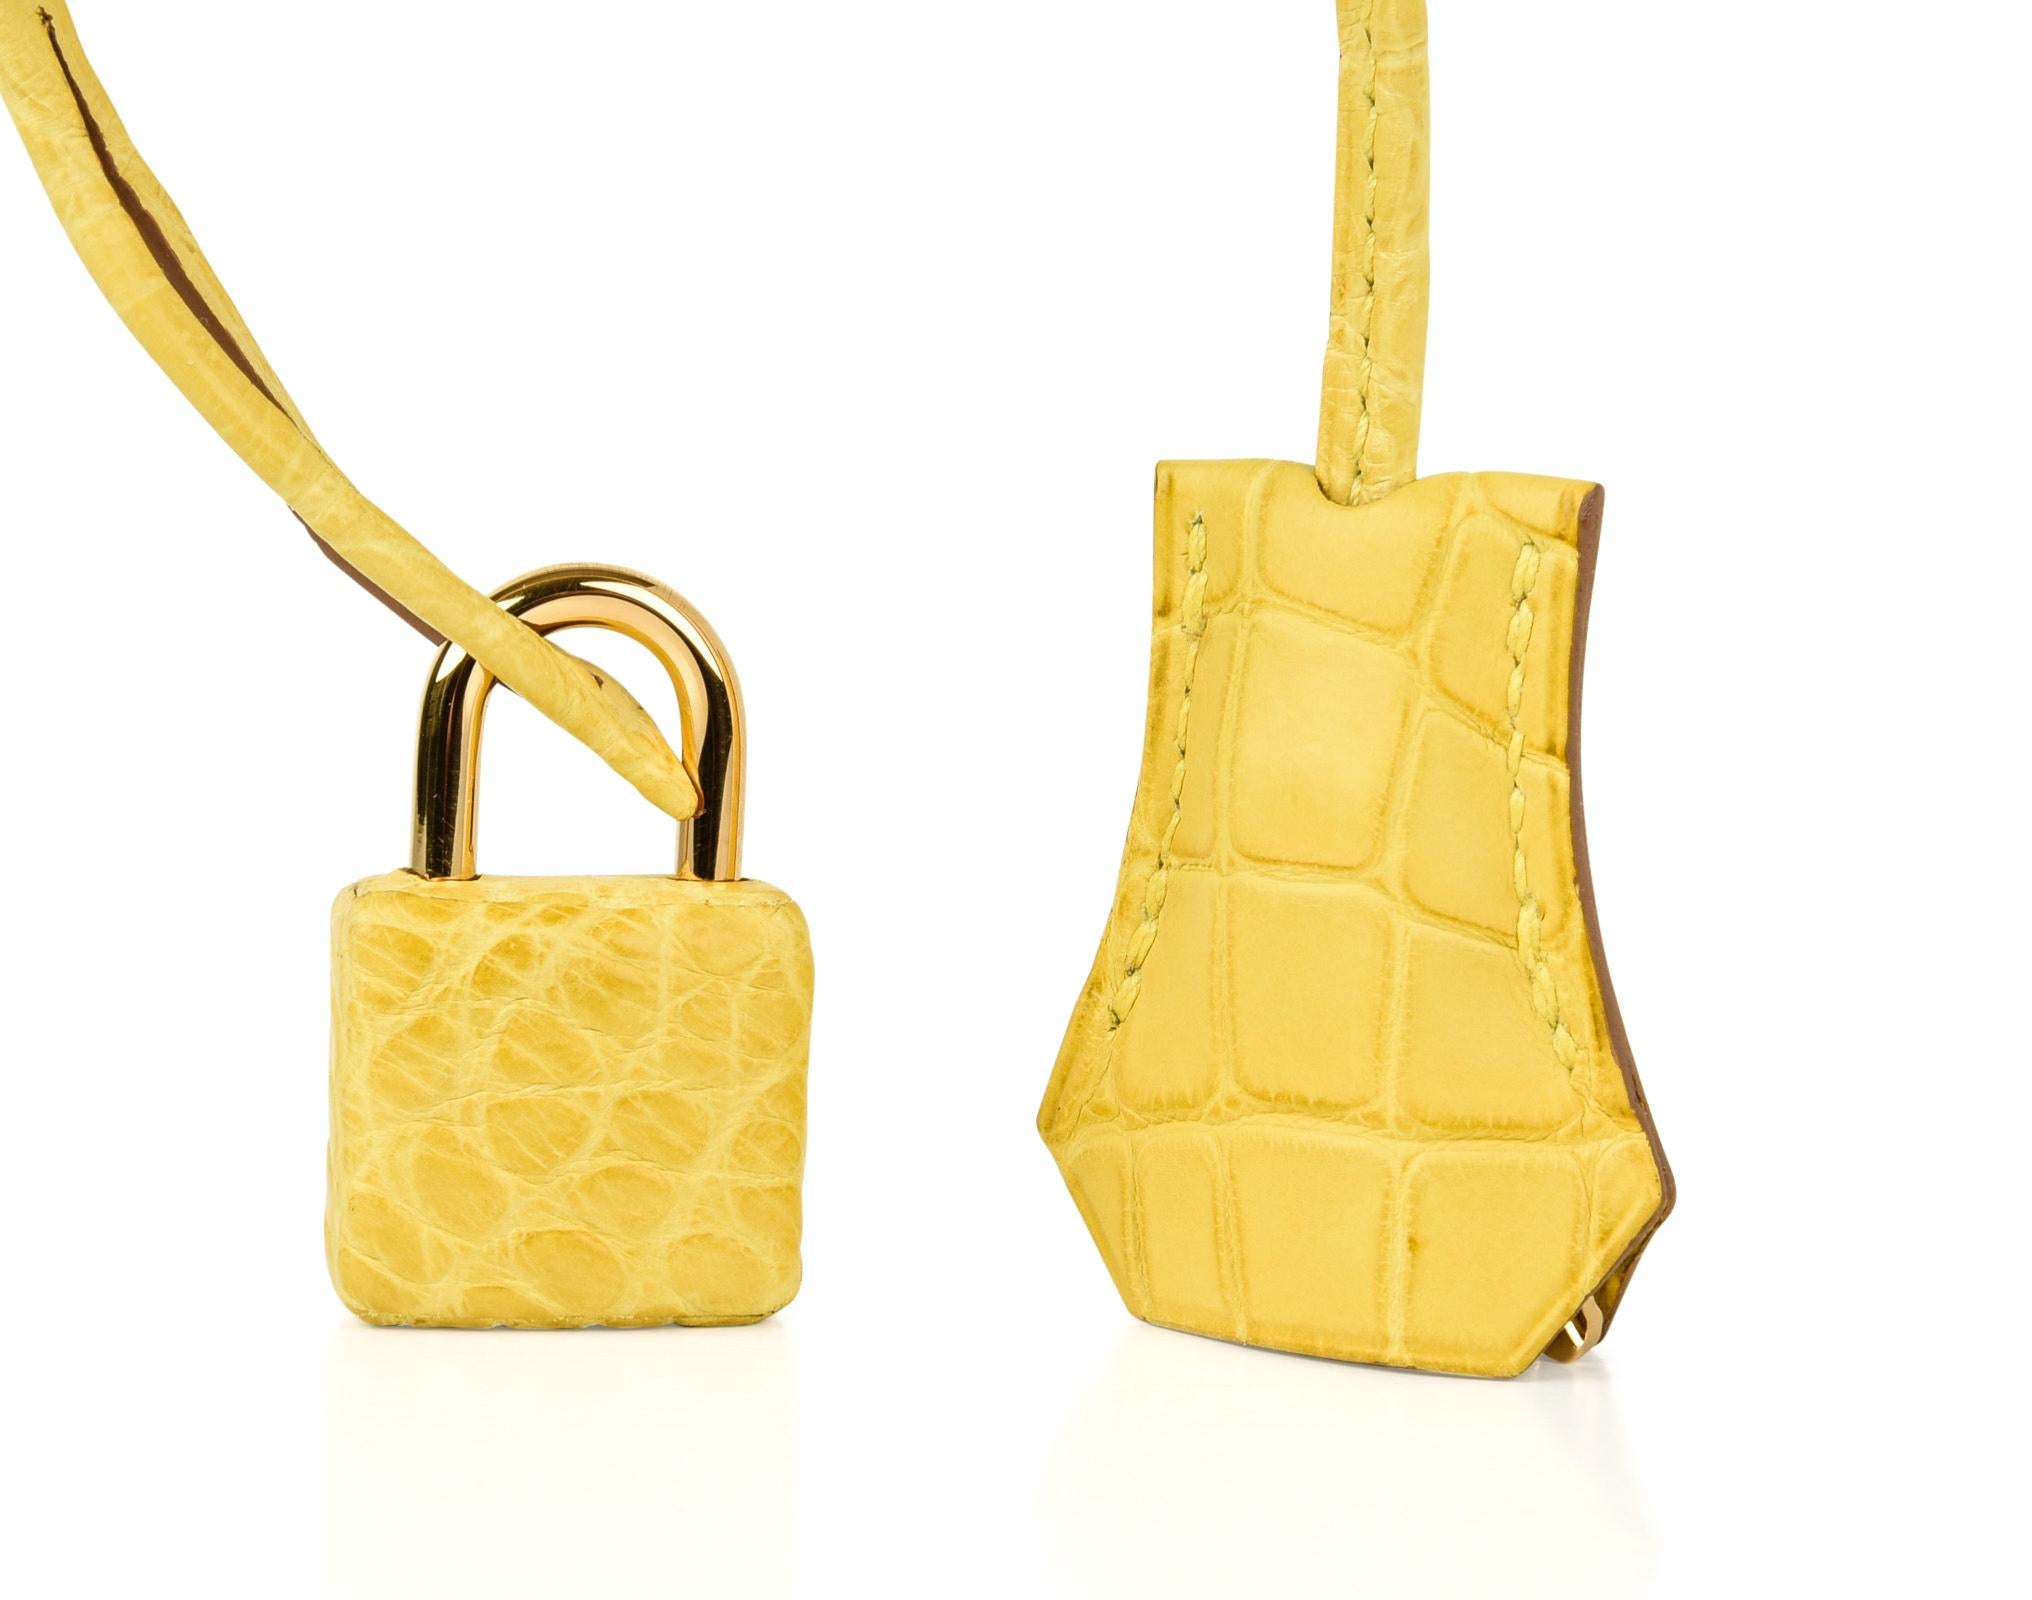 Guaranteed authentic Hermes Birkin 35 Bag divine clear yellow MIimosa matte Alligator.
Rich and lush with gold hardware - simply exquisite. 
NEW or NEVER WORN.  
Comes with lock, keys, clochette, sleeper, signature Hermes box and raincoat. 
final